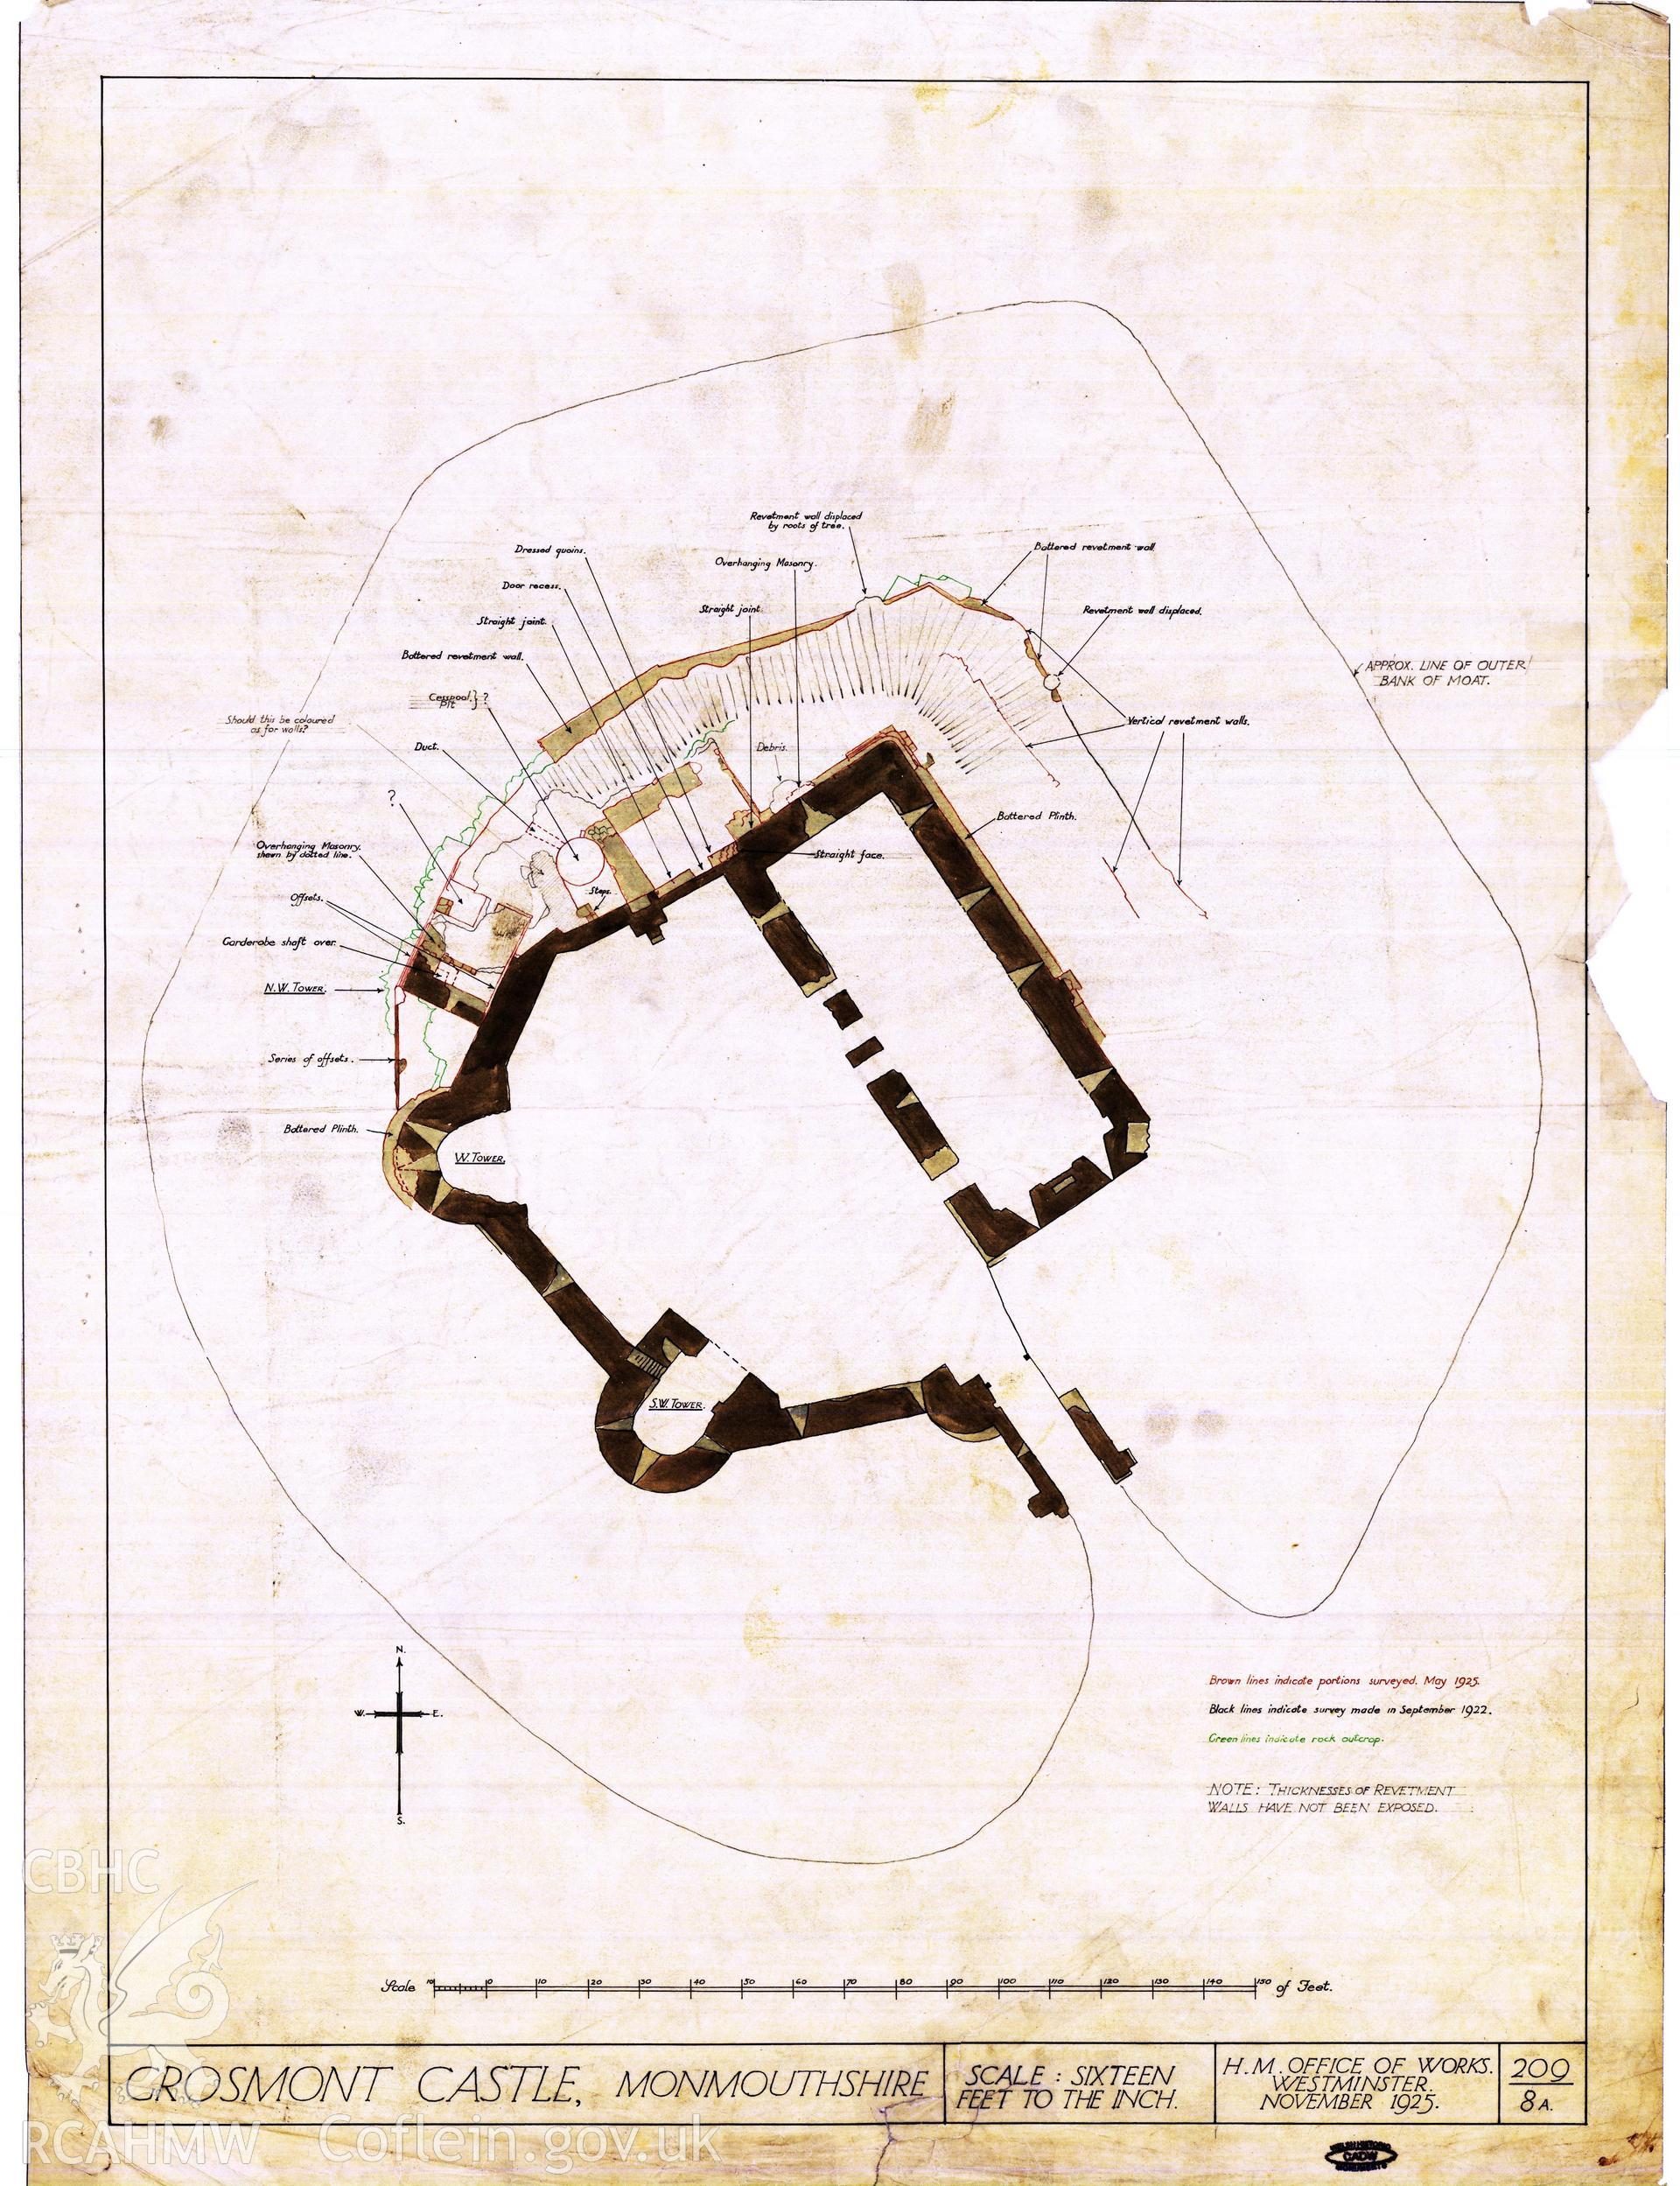 Cadw guardianship monument drawing of Grosmont Castle. Plan + many notes. Cadw Ref. No:209/8A. Scale 1:192.